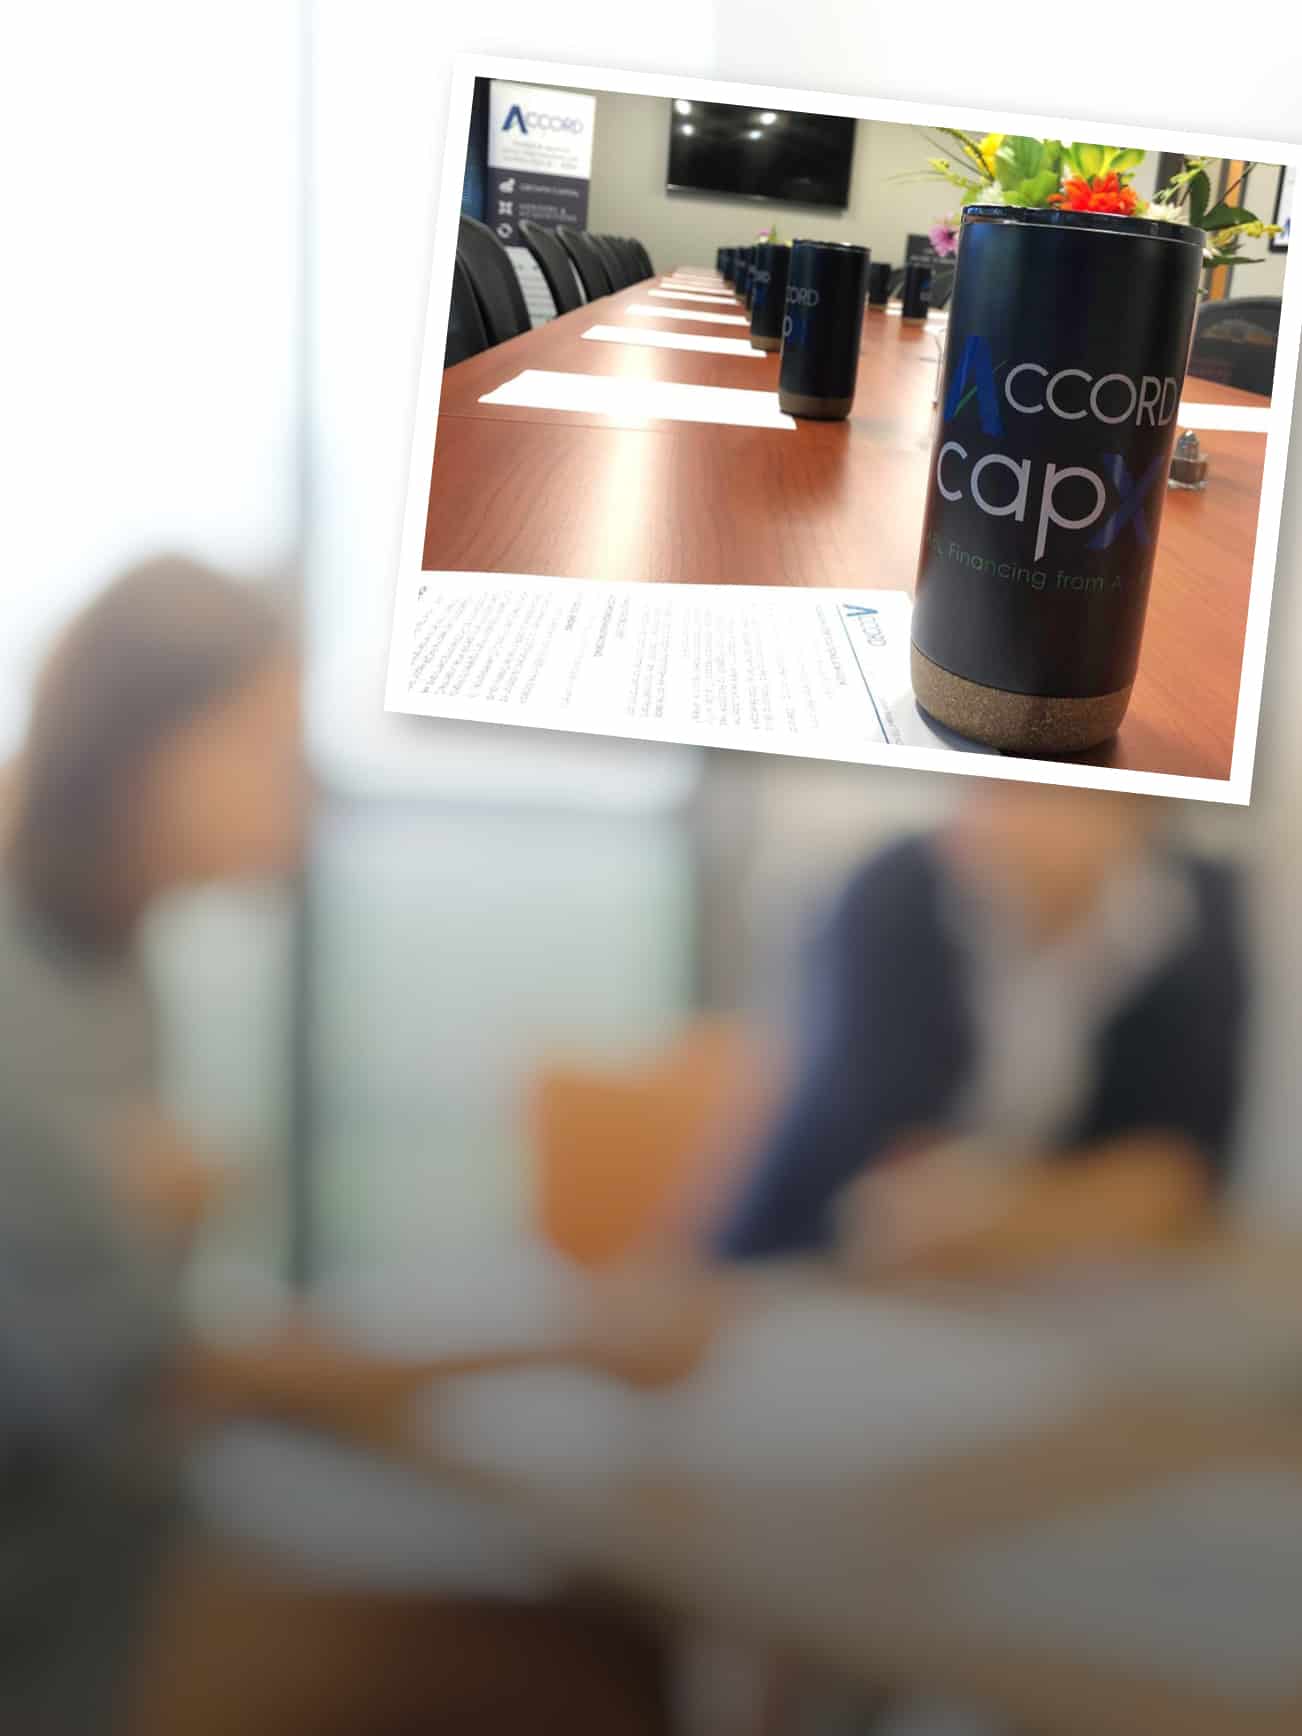 A conference room set up for a meeting with branded giveaways of logoed drink cups at each seat